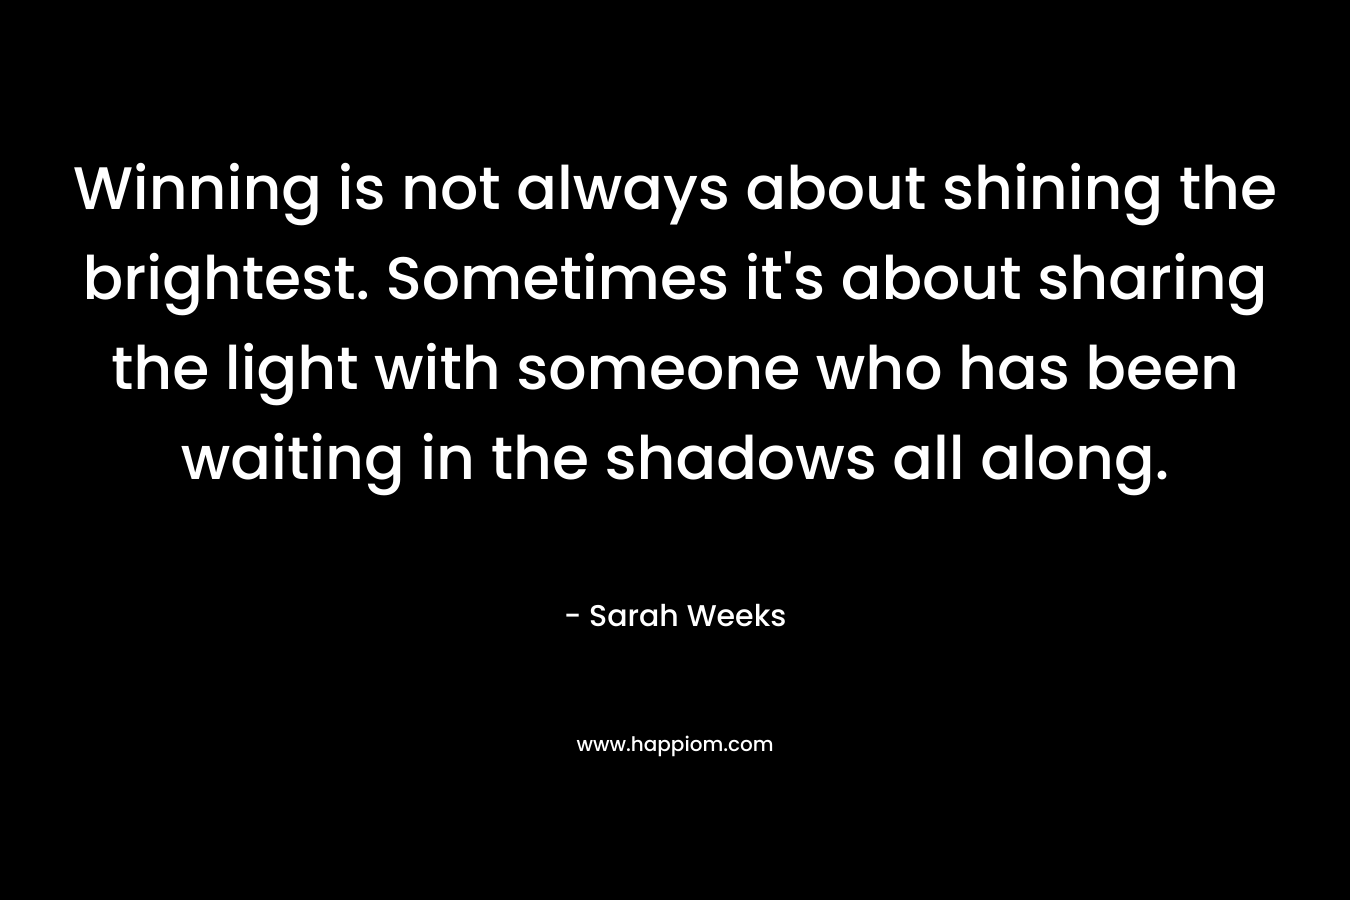 Winning is not always about shining the brightest. Sometimes it's about sharing the light with someone who has been waiting in the shadows all along.